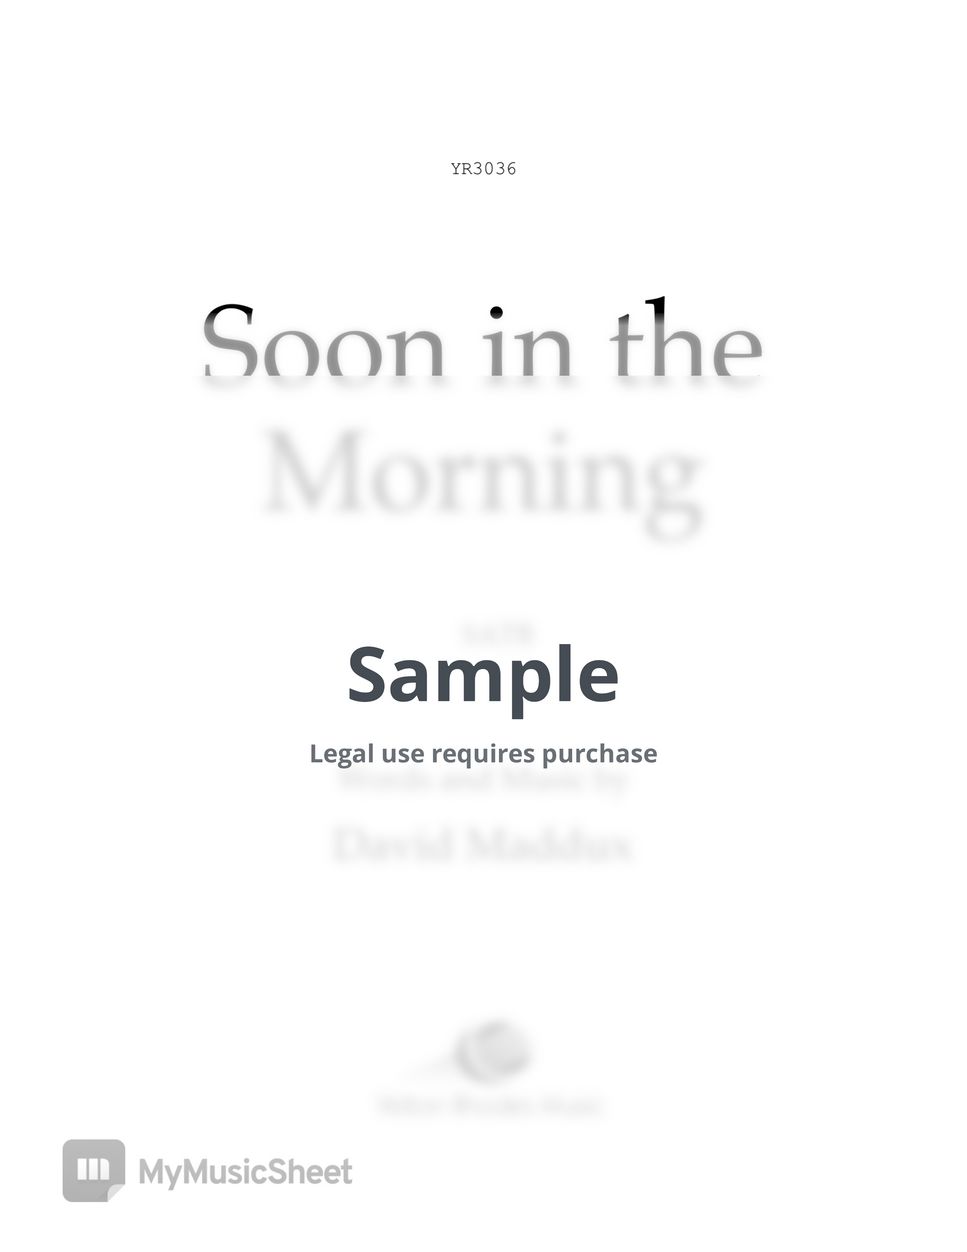 David Maddux - Soon in the Morning by Digital Scores Collection